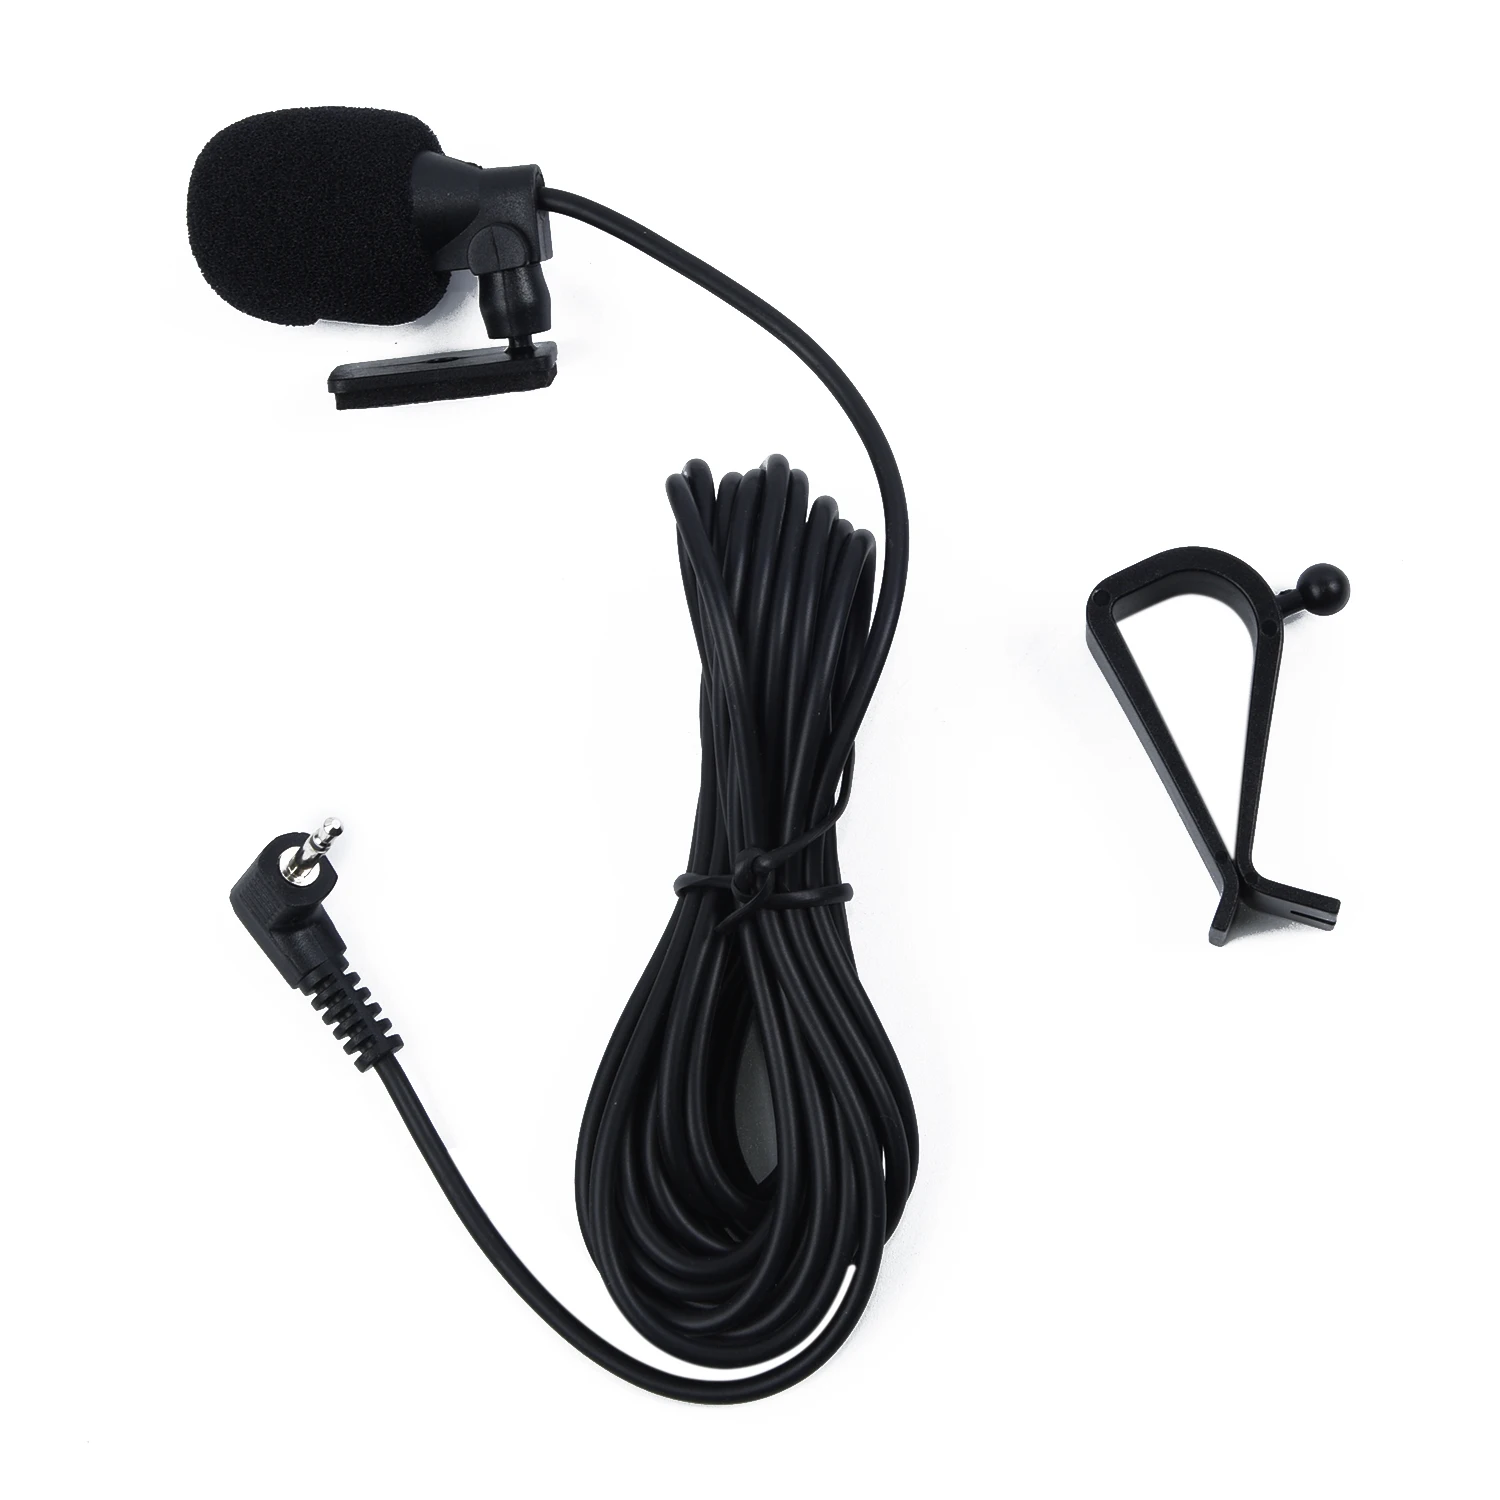 

3 Meters Car Audio Microphone For Car Pioneer Stereos Radio Receiver External Microphone 2.5mm Car Stereo Accessories